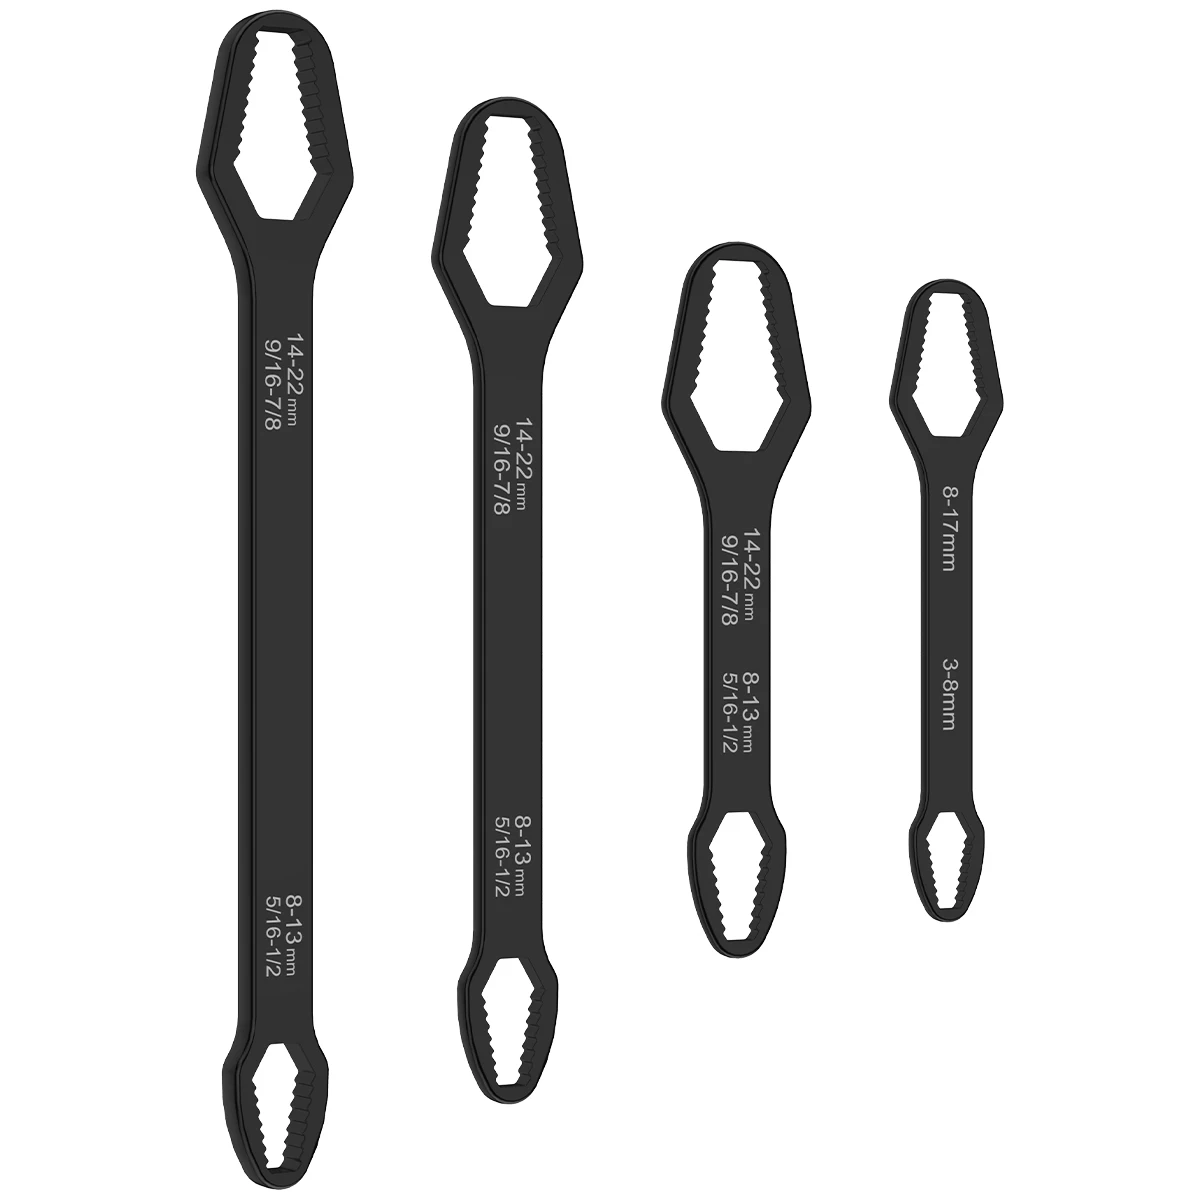 

4Pcs Multifunctional Wrench Set Double-head Torx Wrench 5/16inch-7/8inch and 1/8inch-11/16inch Self-tightening Spanner Hand Tool